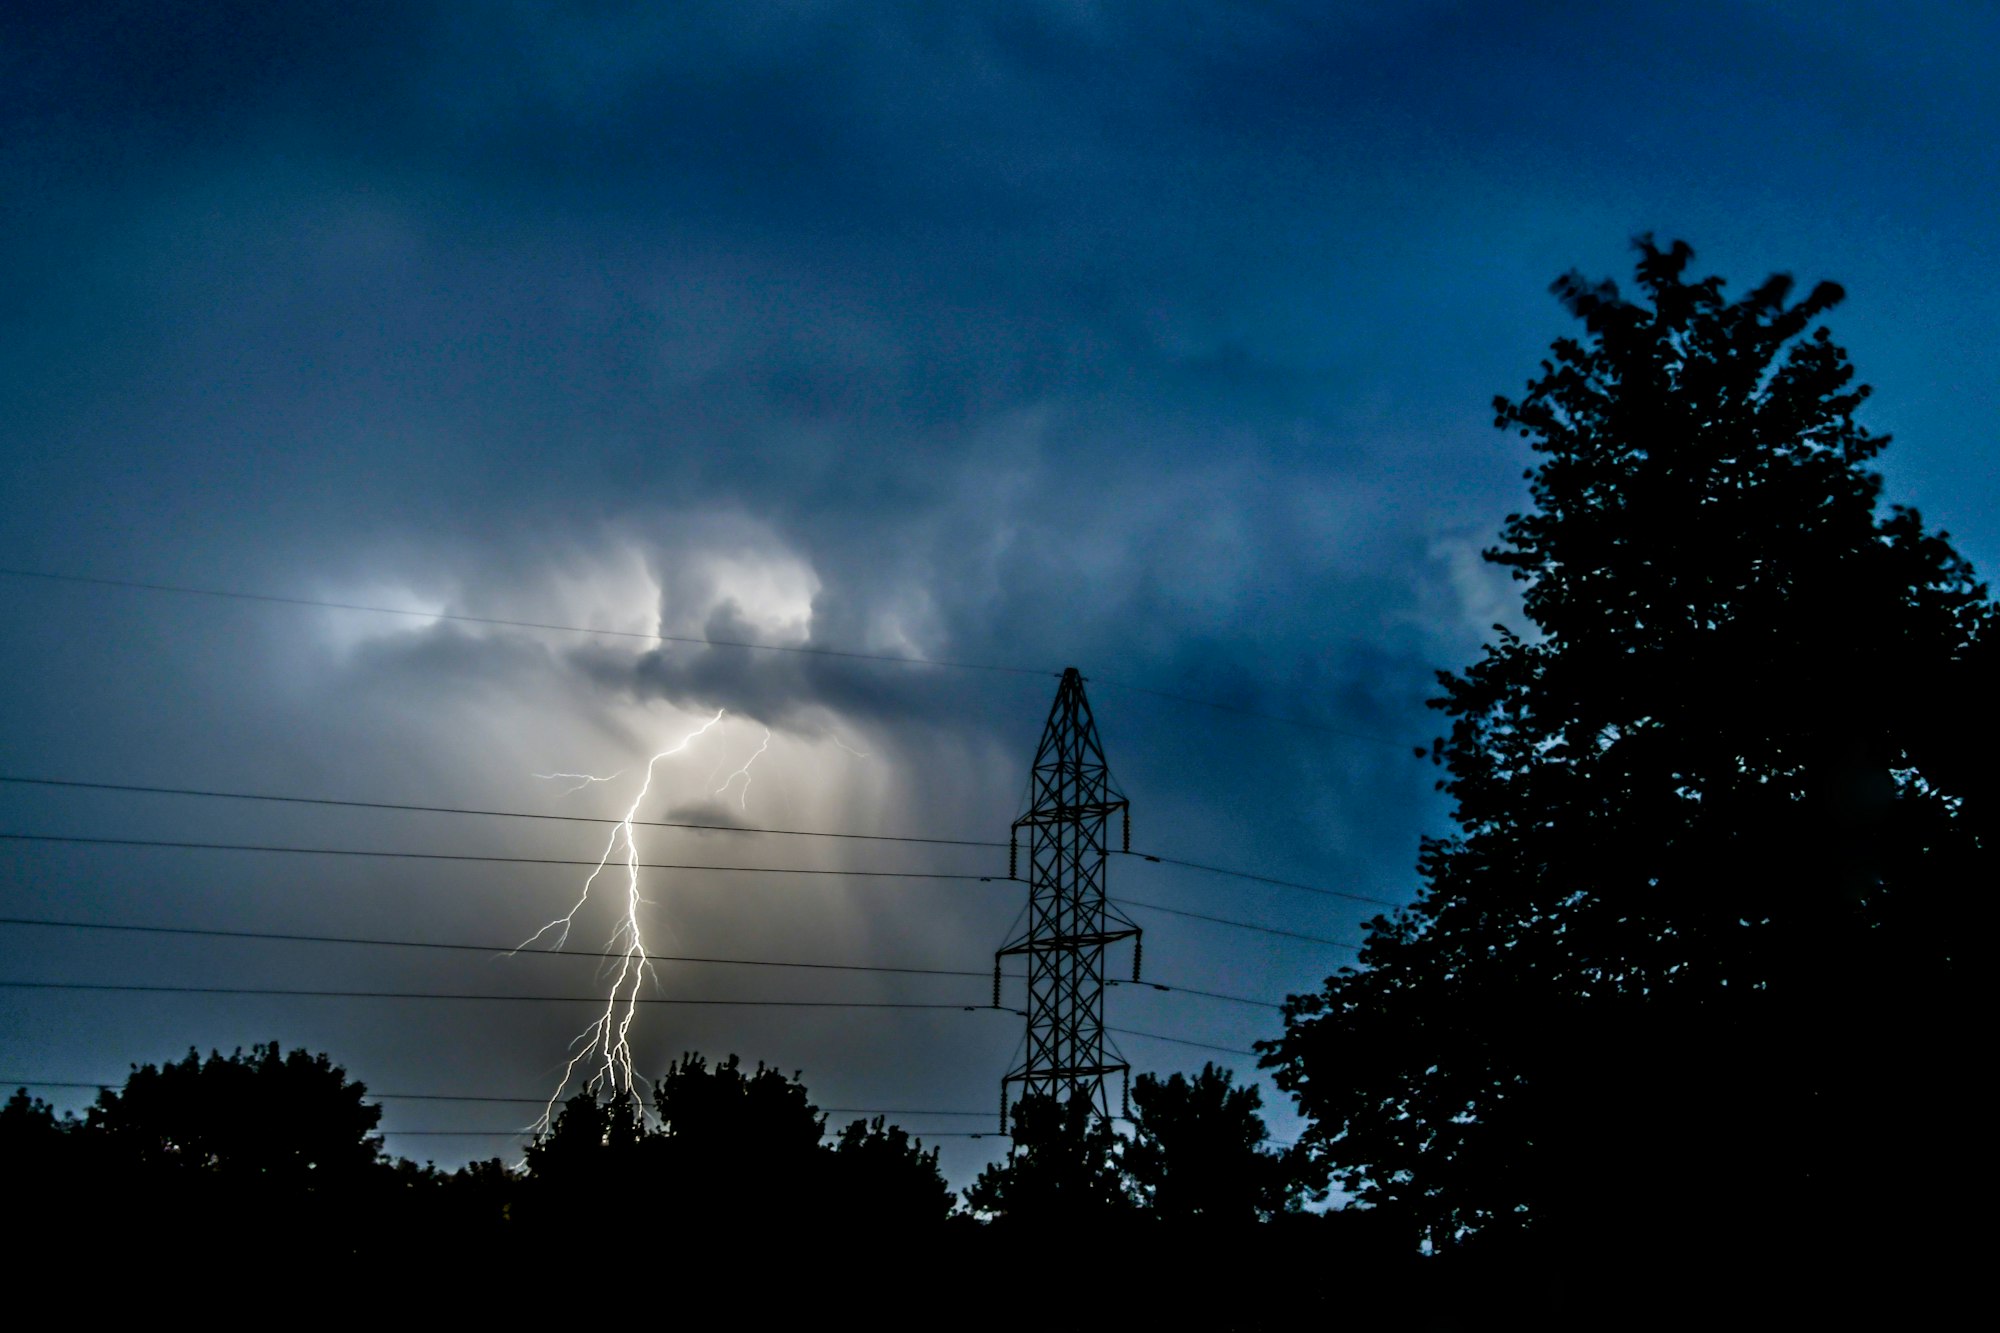 Lightning flashes out of a cloud, in the distance behind tall power lines, with trees silhouetted in the foreground.